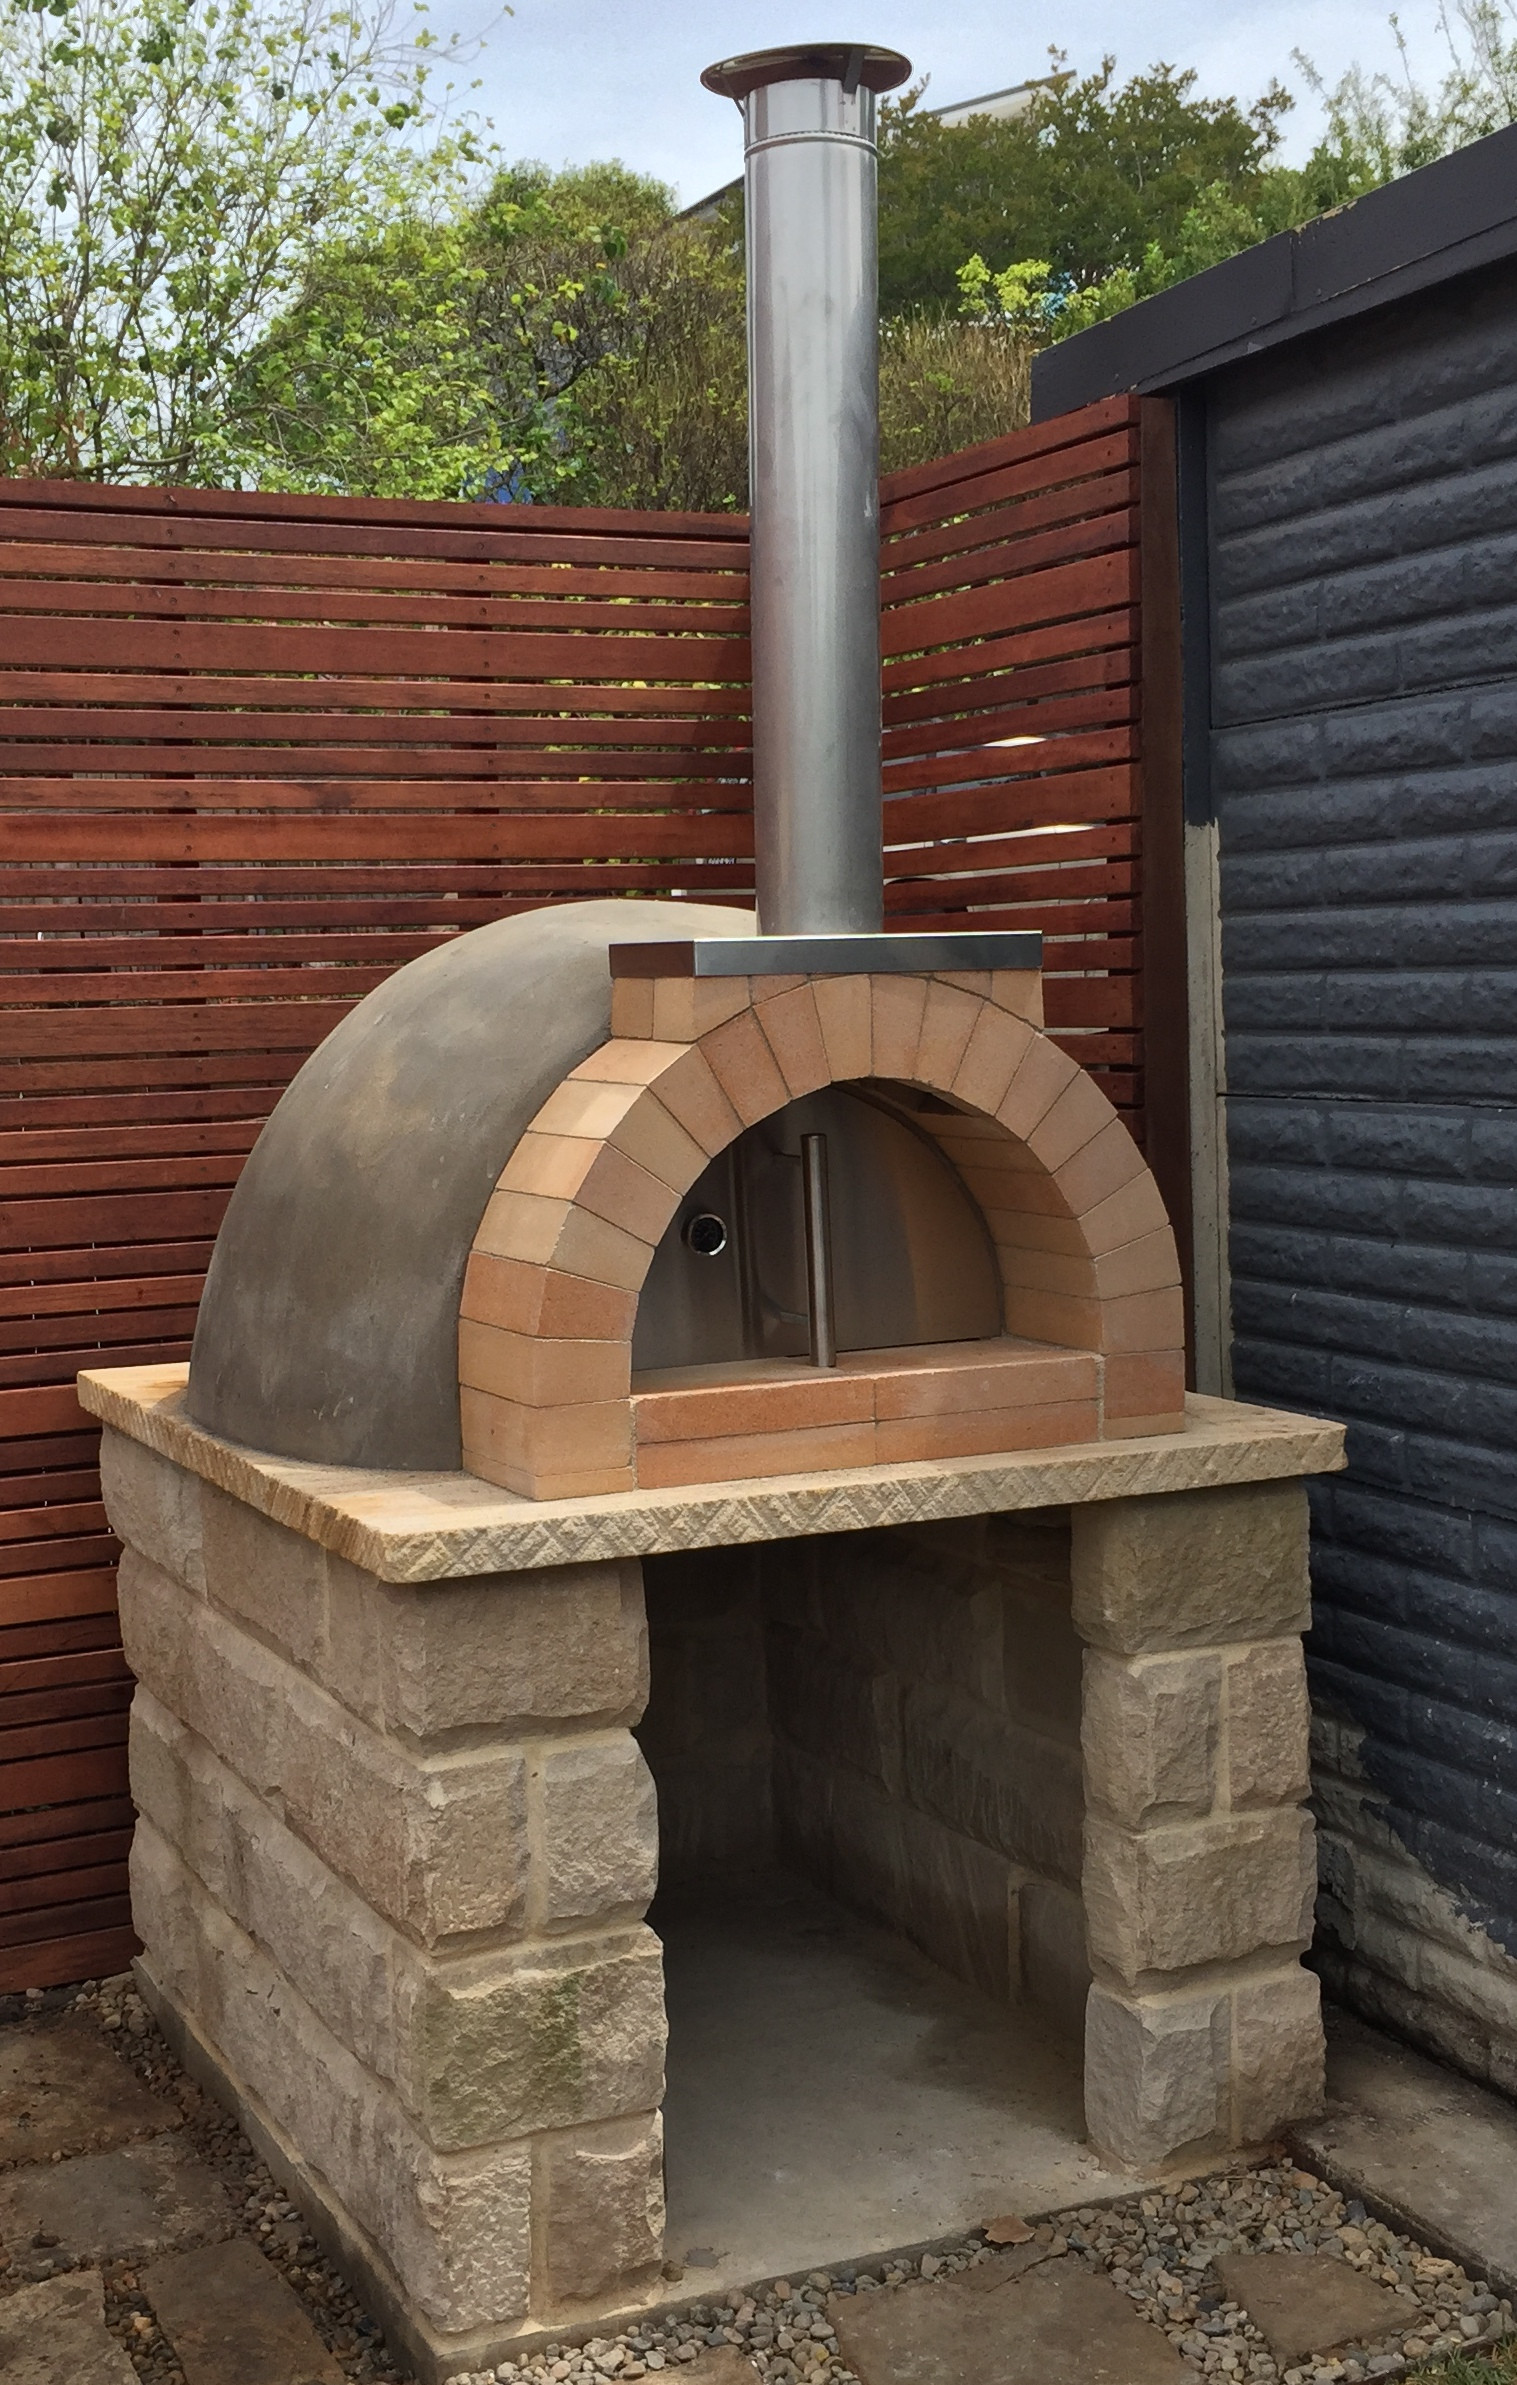 DIY Wood Fired Pizza Oven
 Buy Calabrese entertainer woodfired pizza oven DIY kit